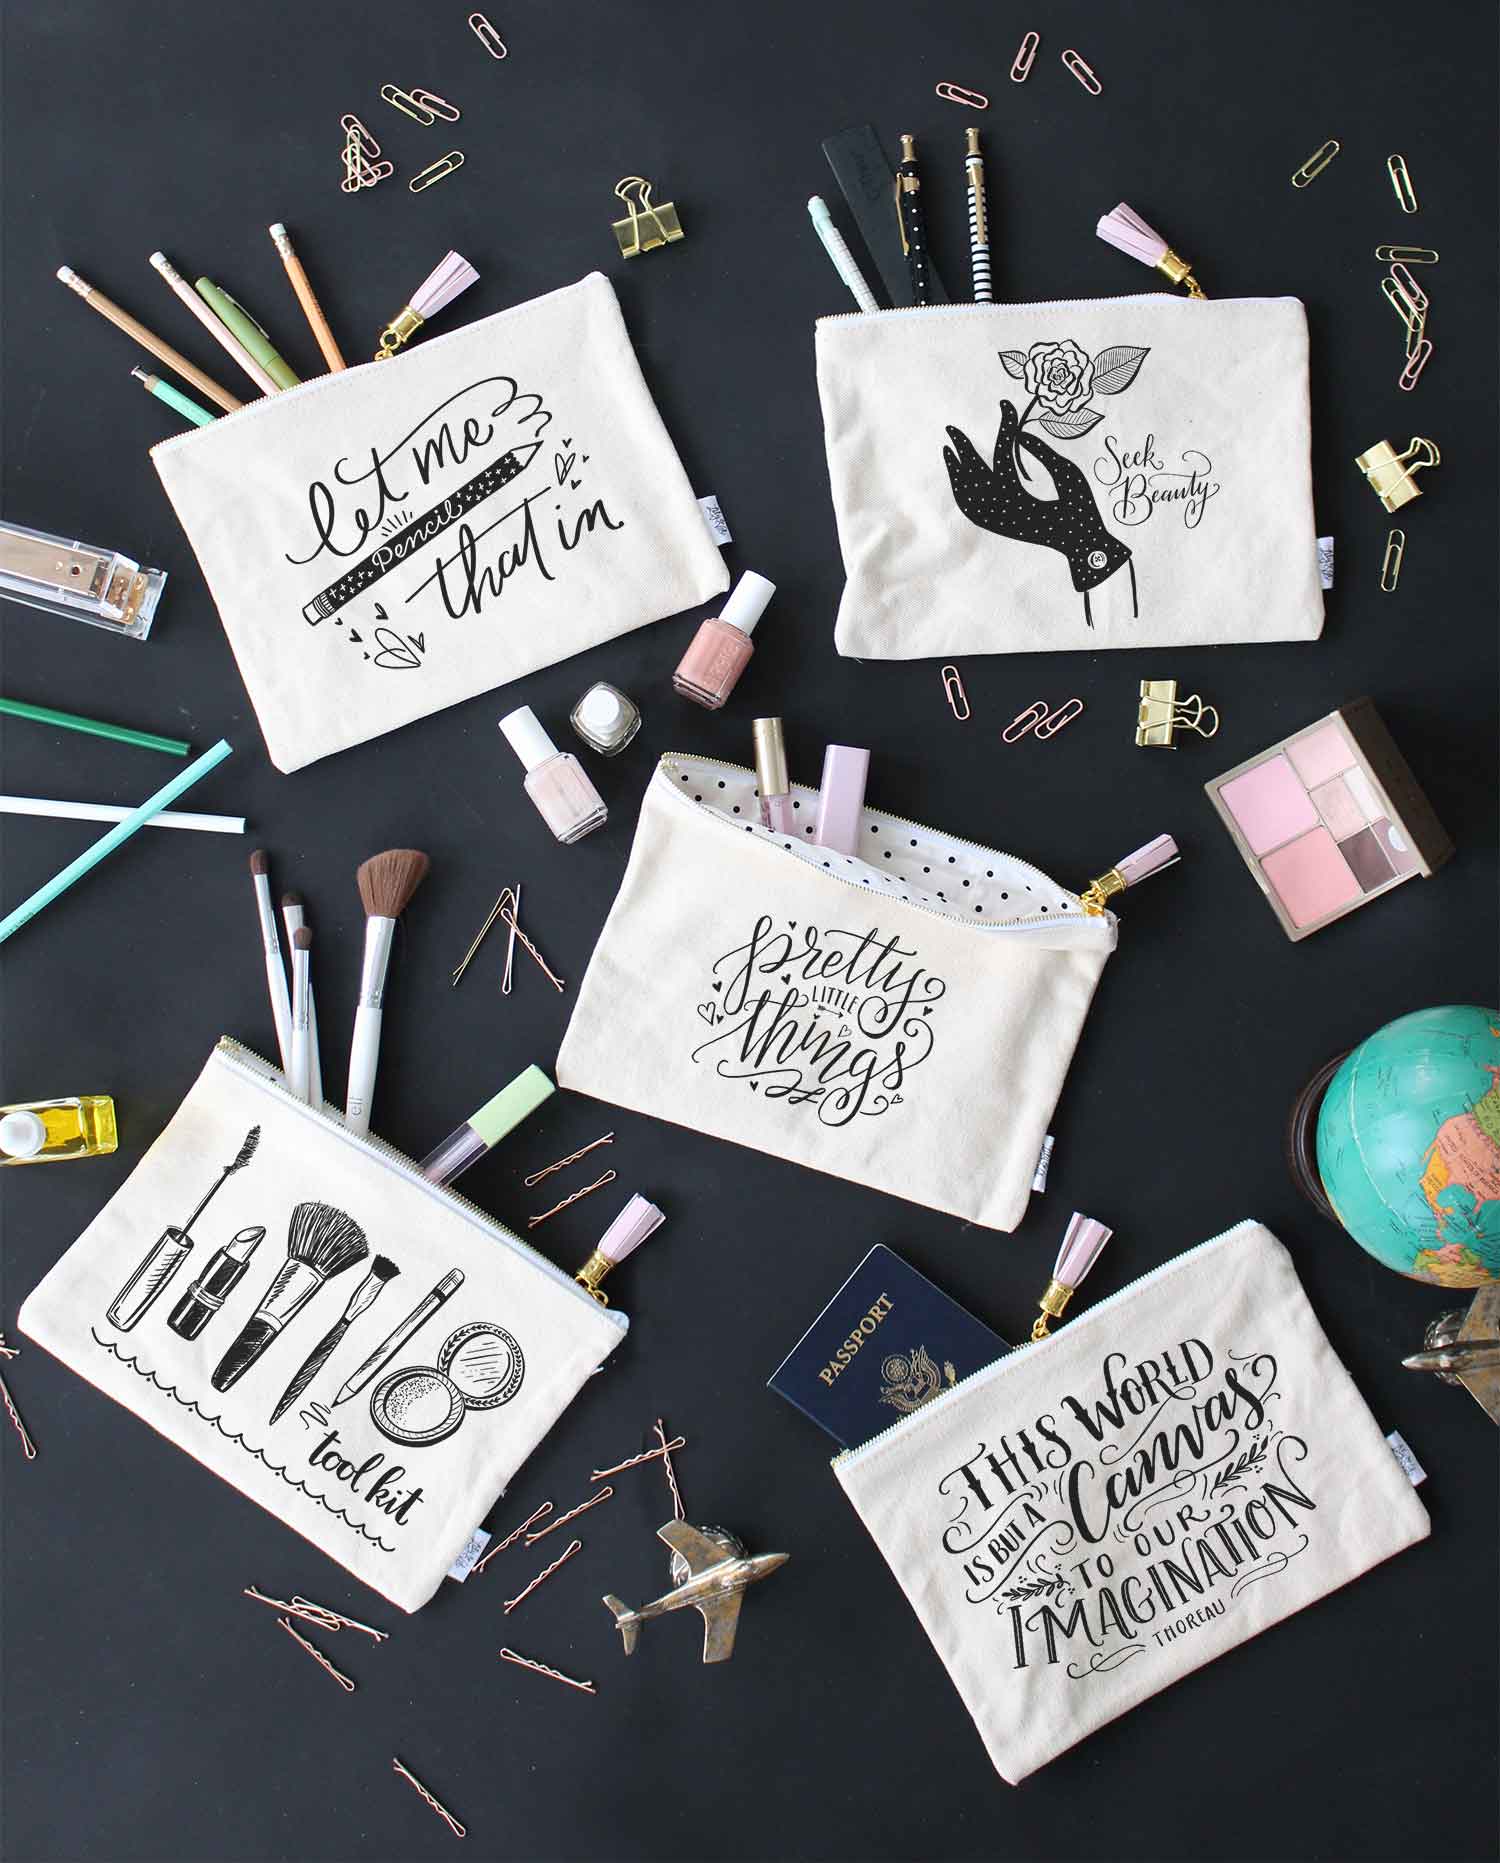 Hand lettered and screen printed zippered pouches from Lily & Val